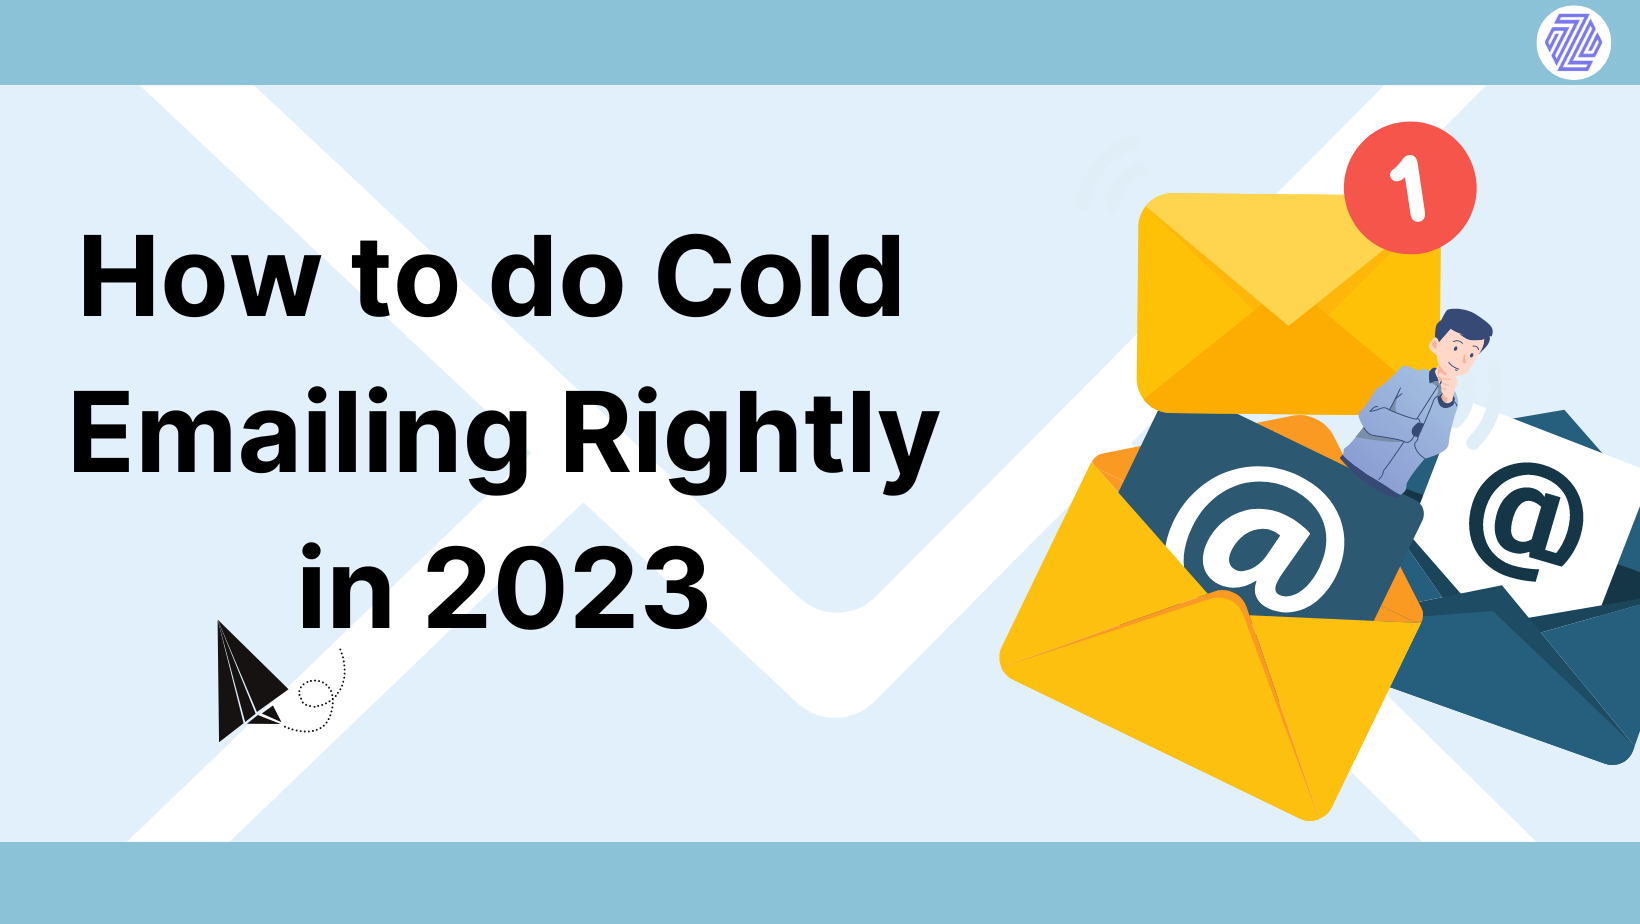 How to do Cold Emailing Rightly in 2023